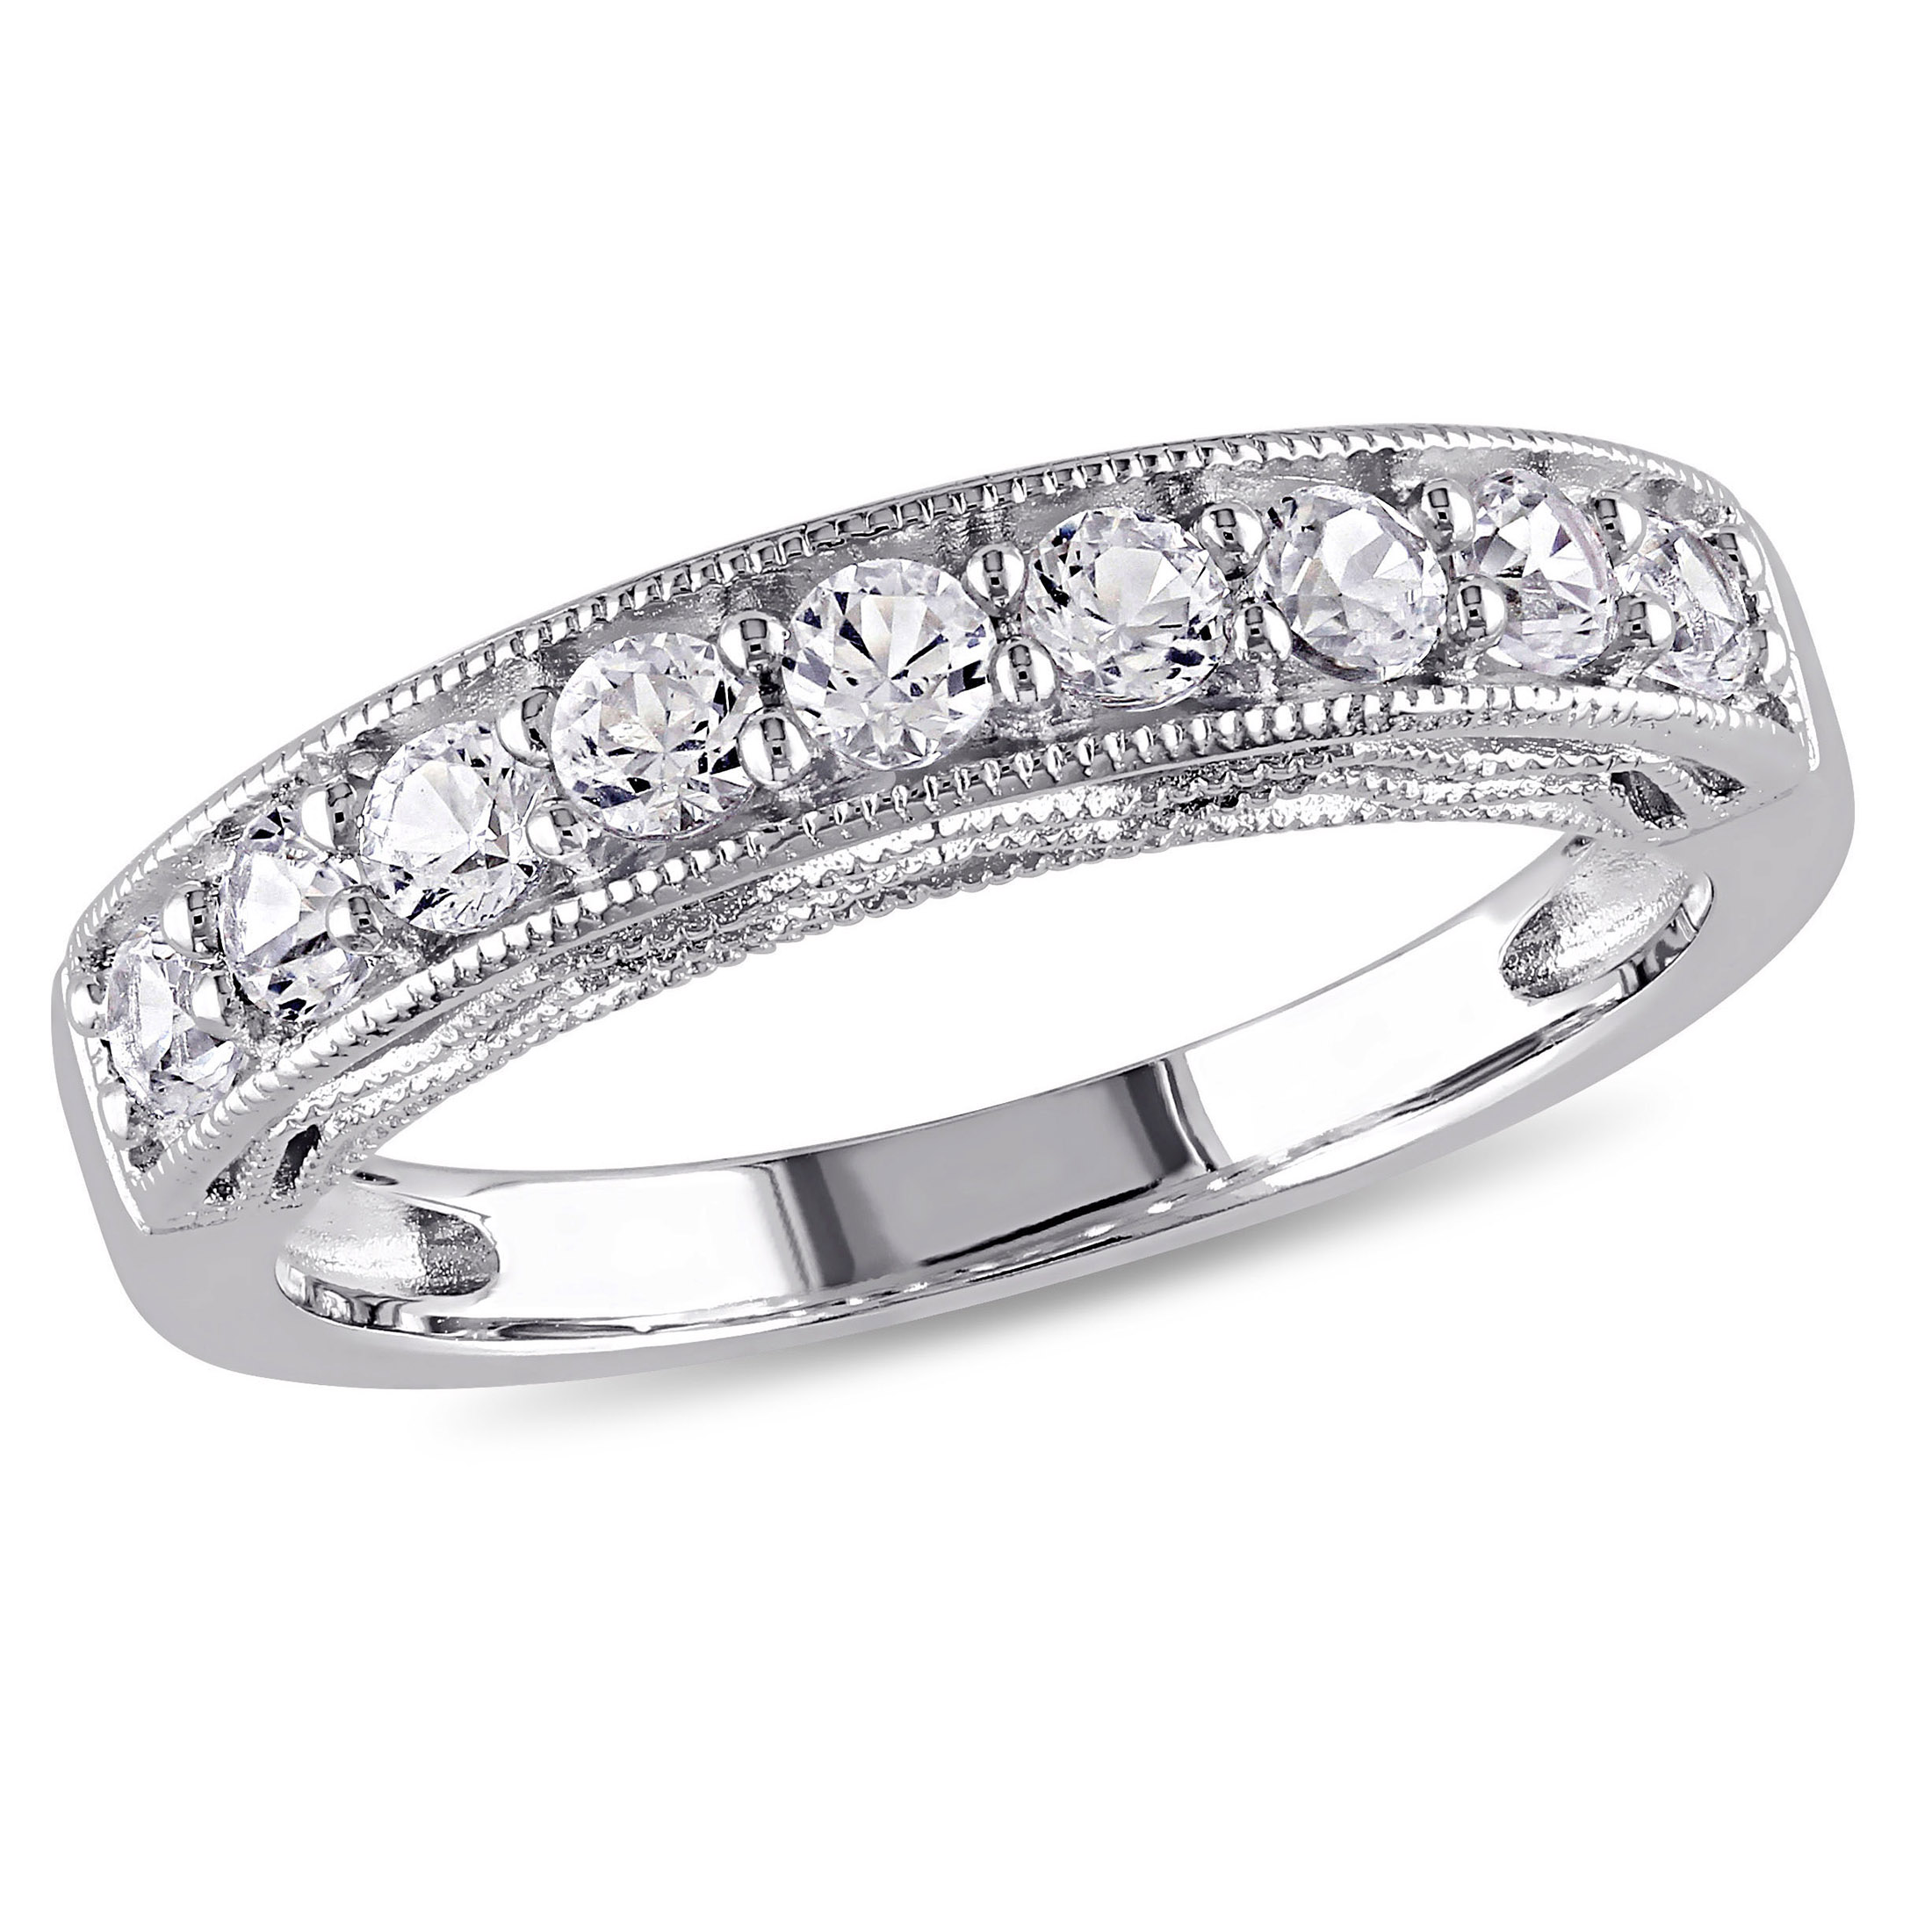 Everly Women's Anniversary Bridal 4/5 CT T.G.W. Round-Cut Created White Sapphire Sterling Silver Semi-Eternity Anniversary Ring with Pave Setting and Milgrain Detail - image 1 of 8